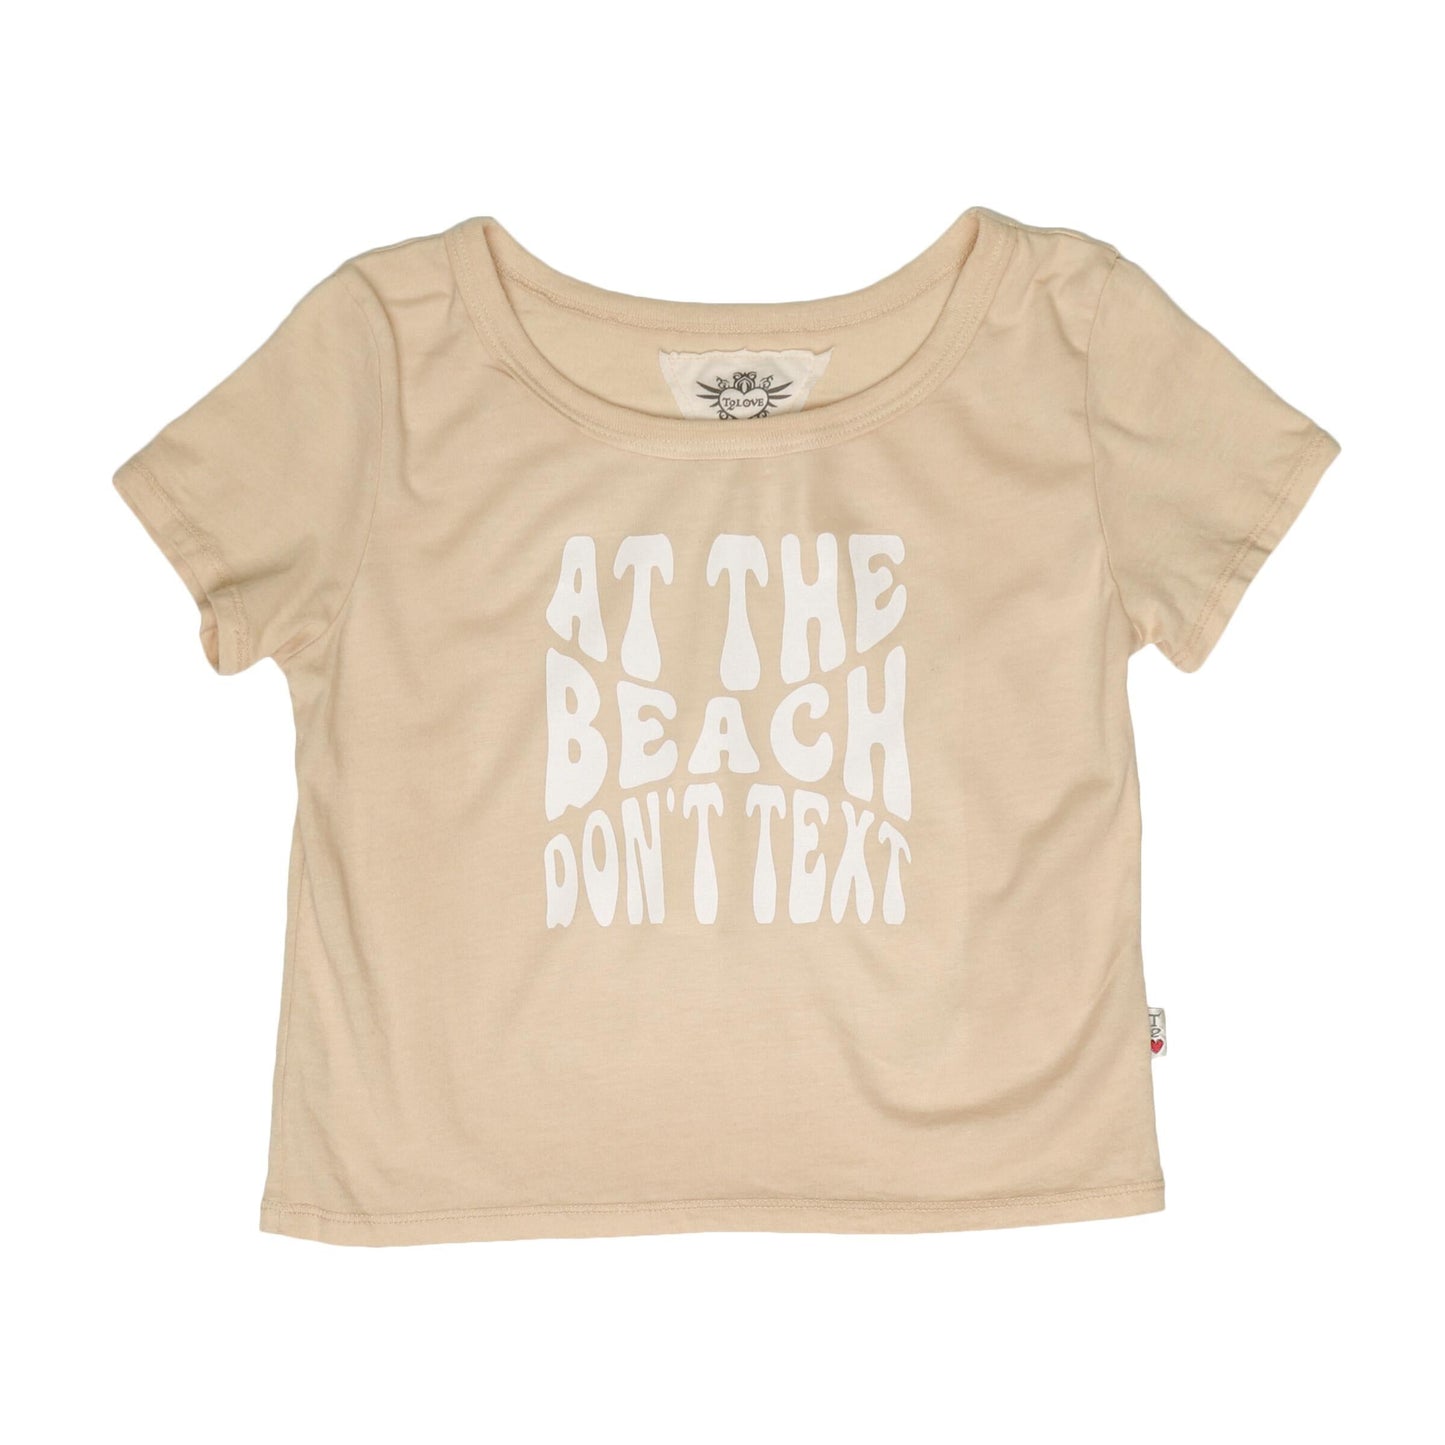 "AT THE BEACH DON'T TEXT" Boxy Top